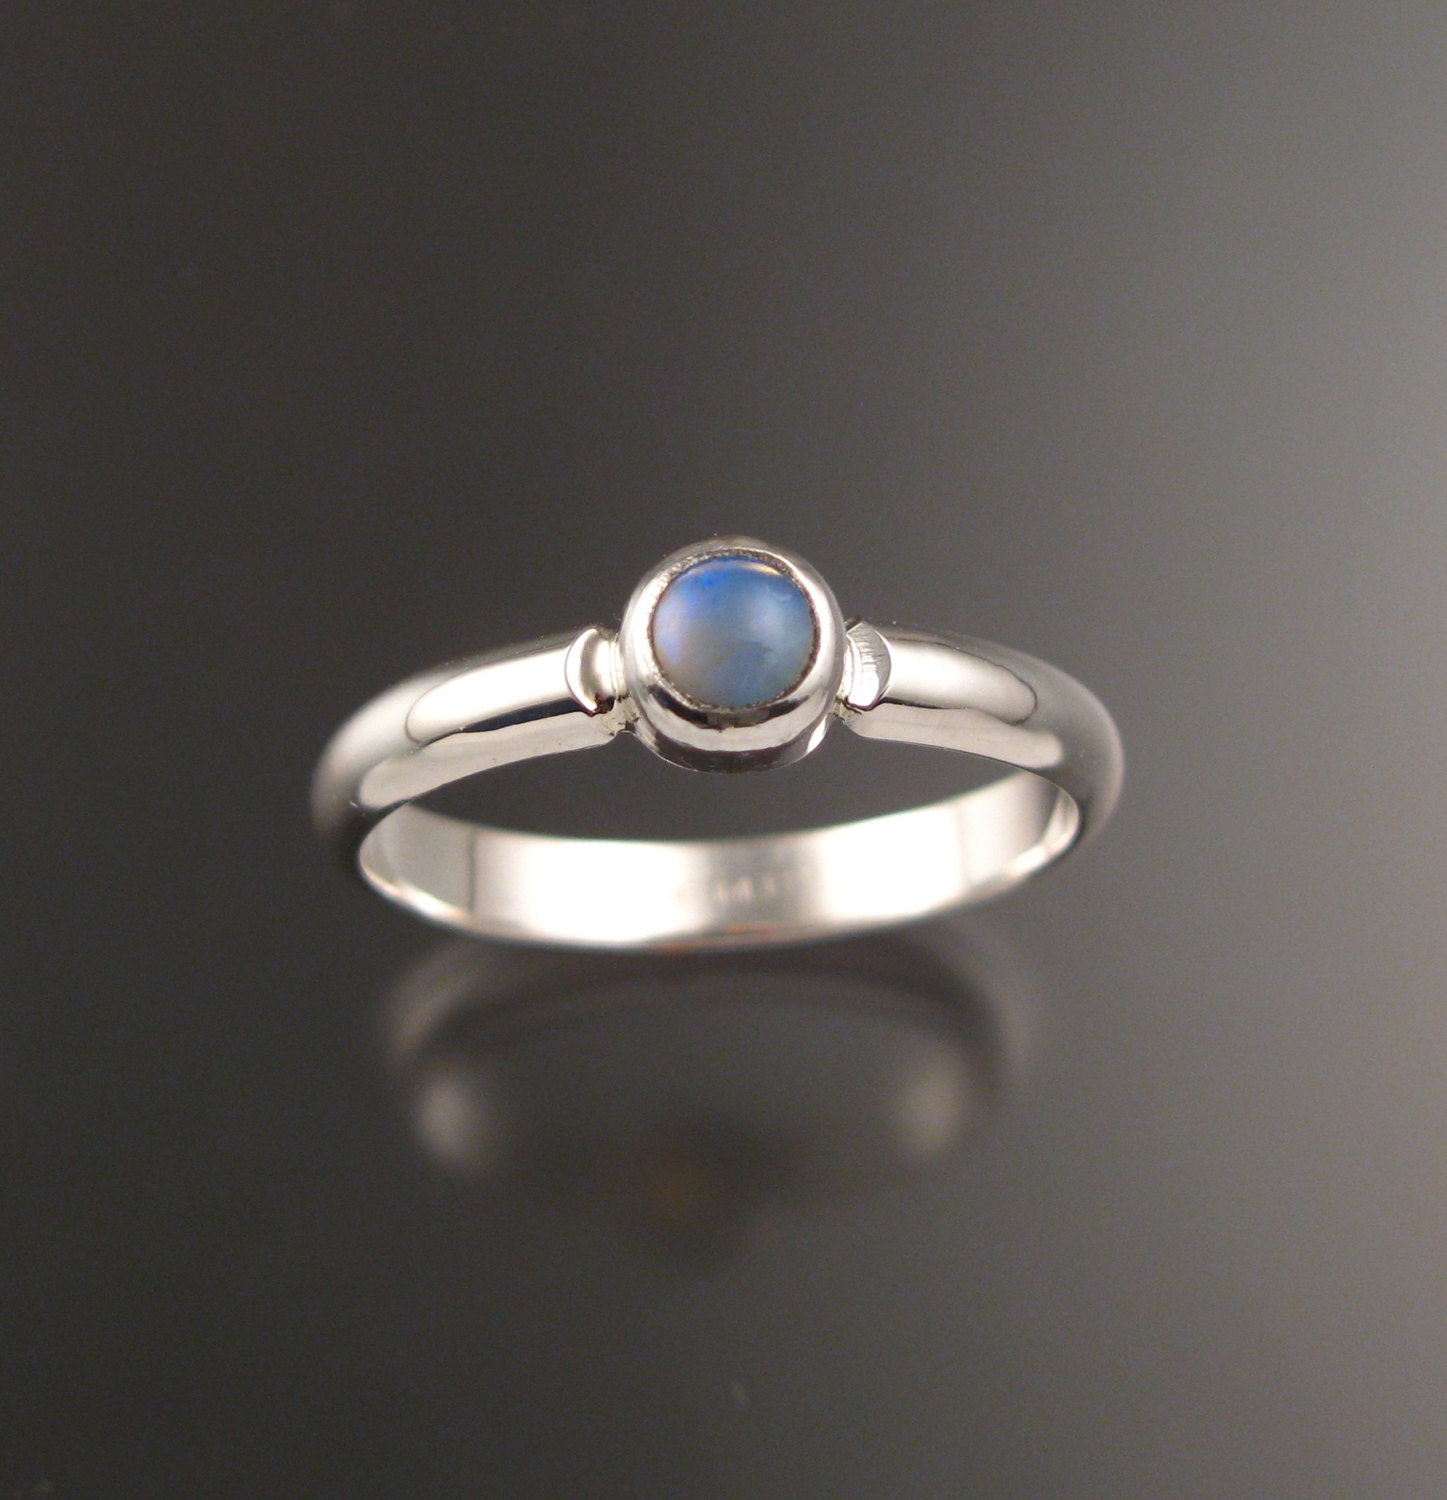 Opal Ring Sterling Silver Bezel set Crystal Opal ring made to order in ...